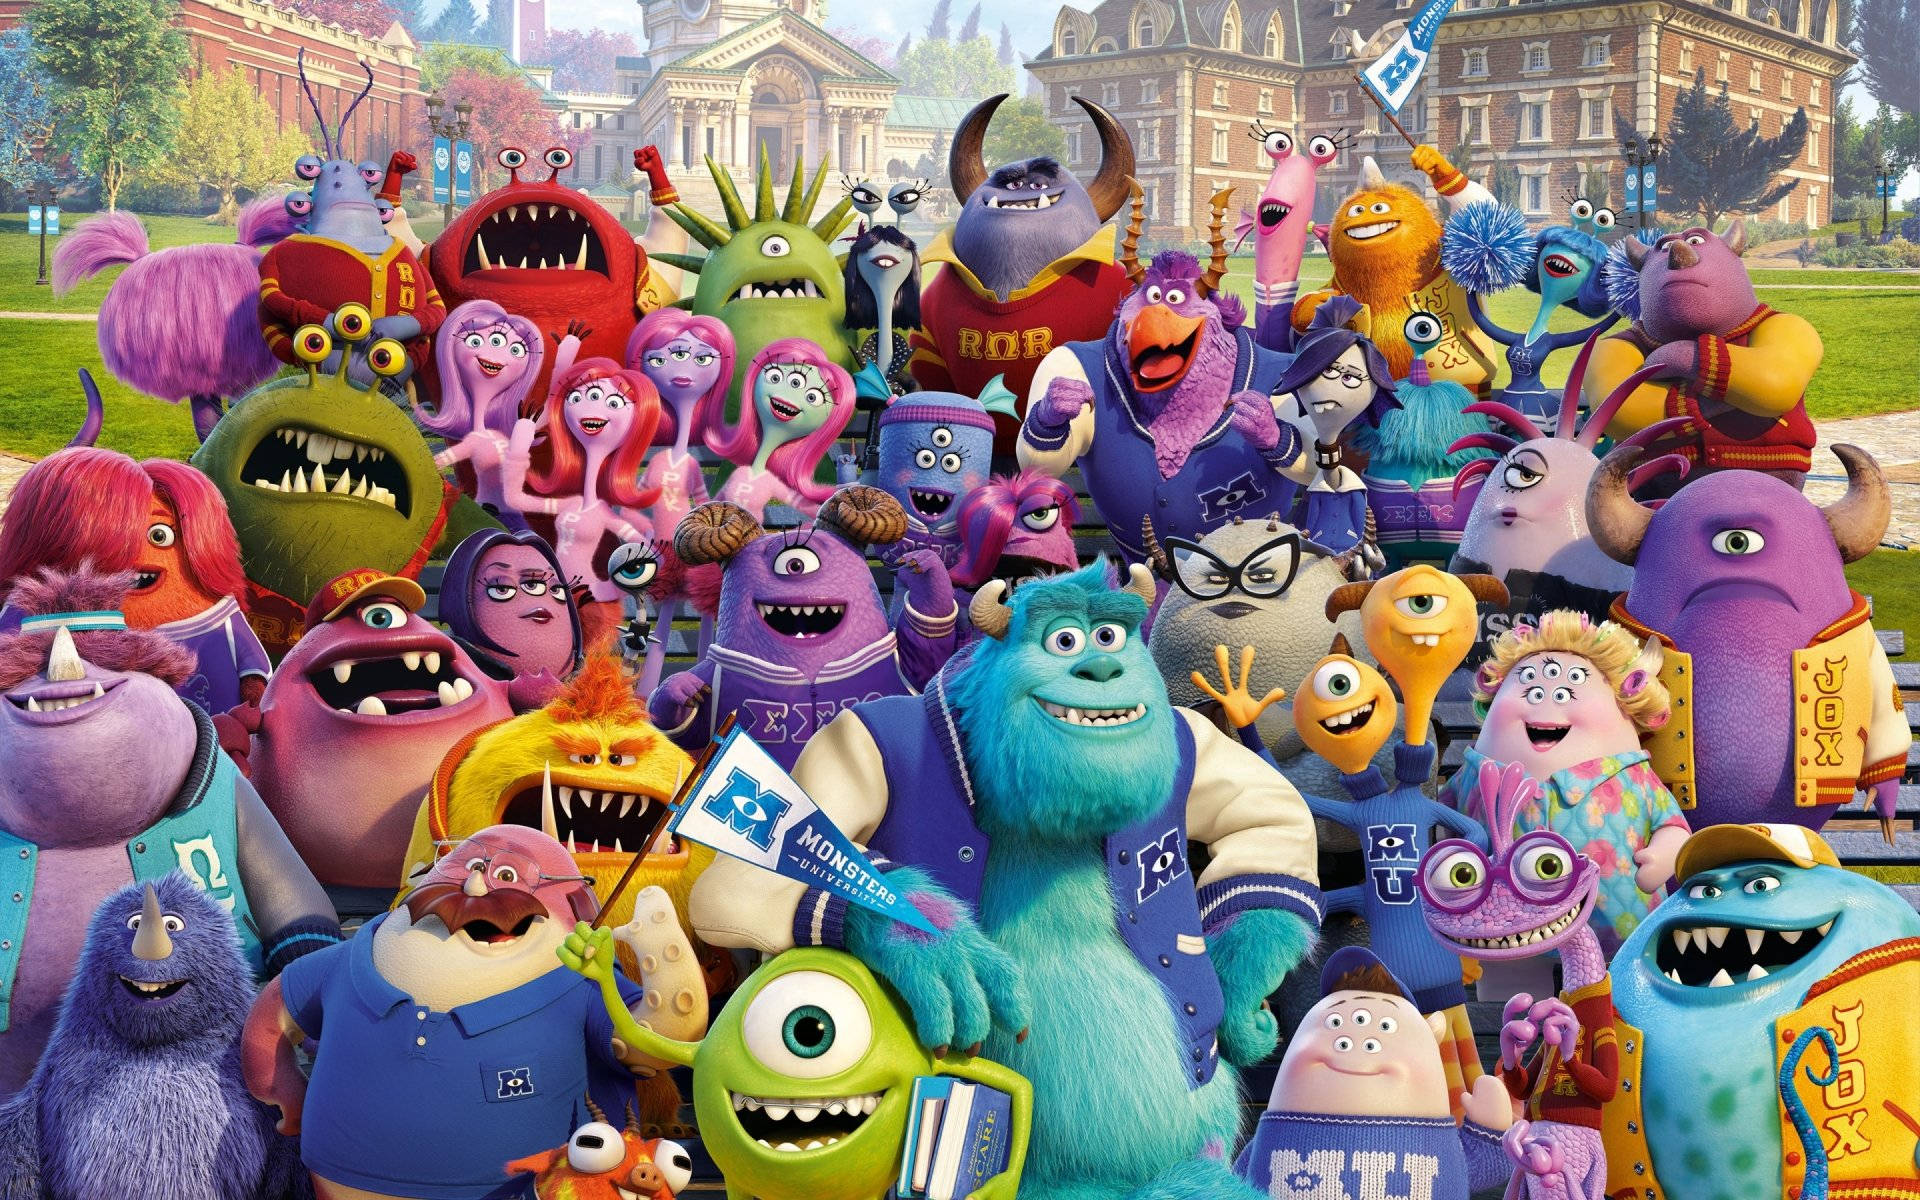 Top 999+ Monsters University Wallpaper Full HD, 4K✅Free to Use